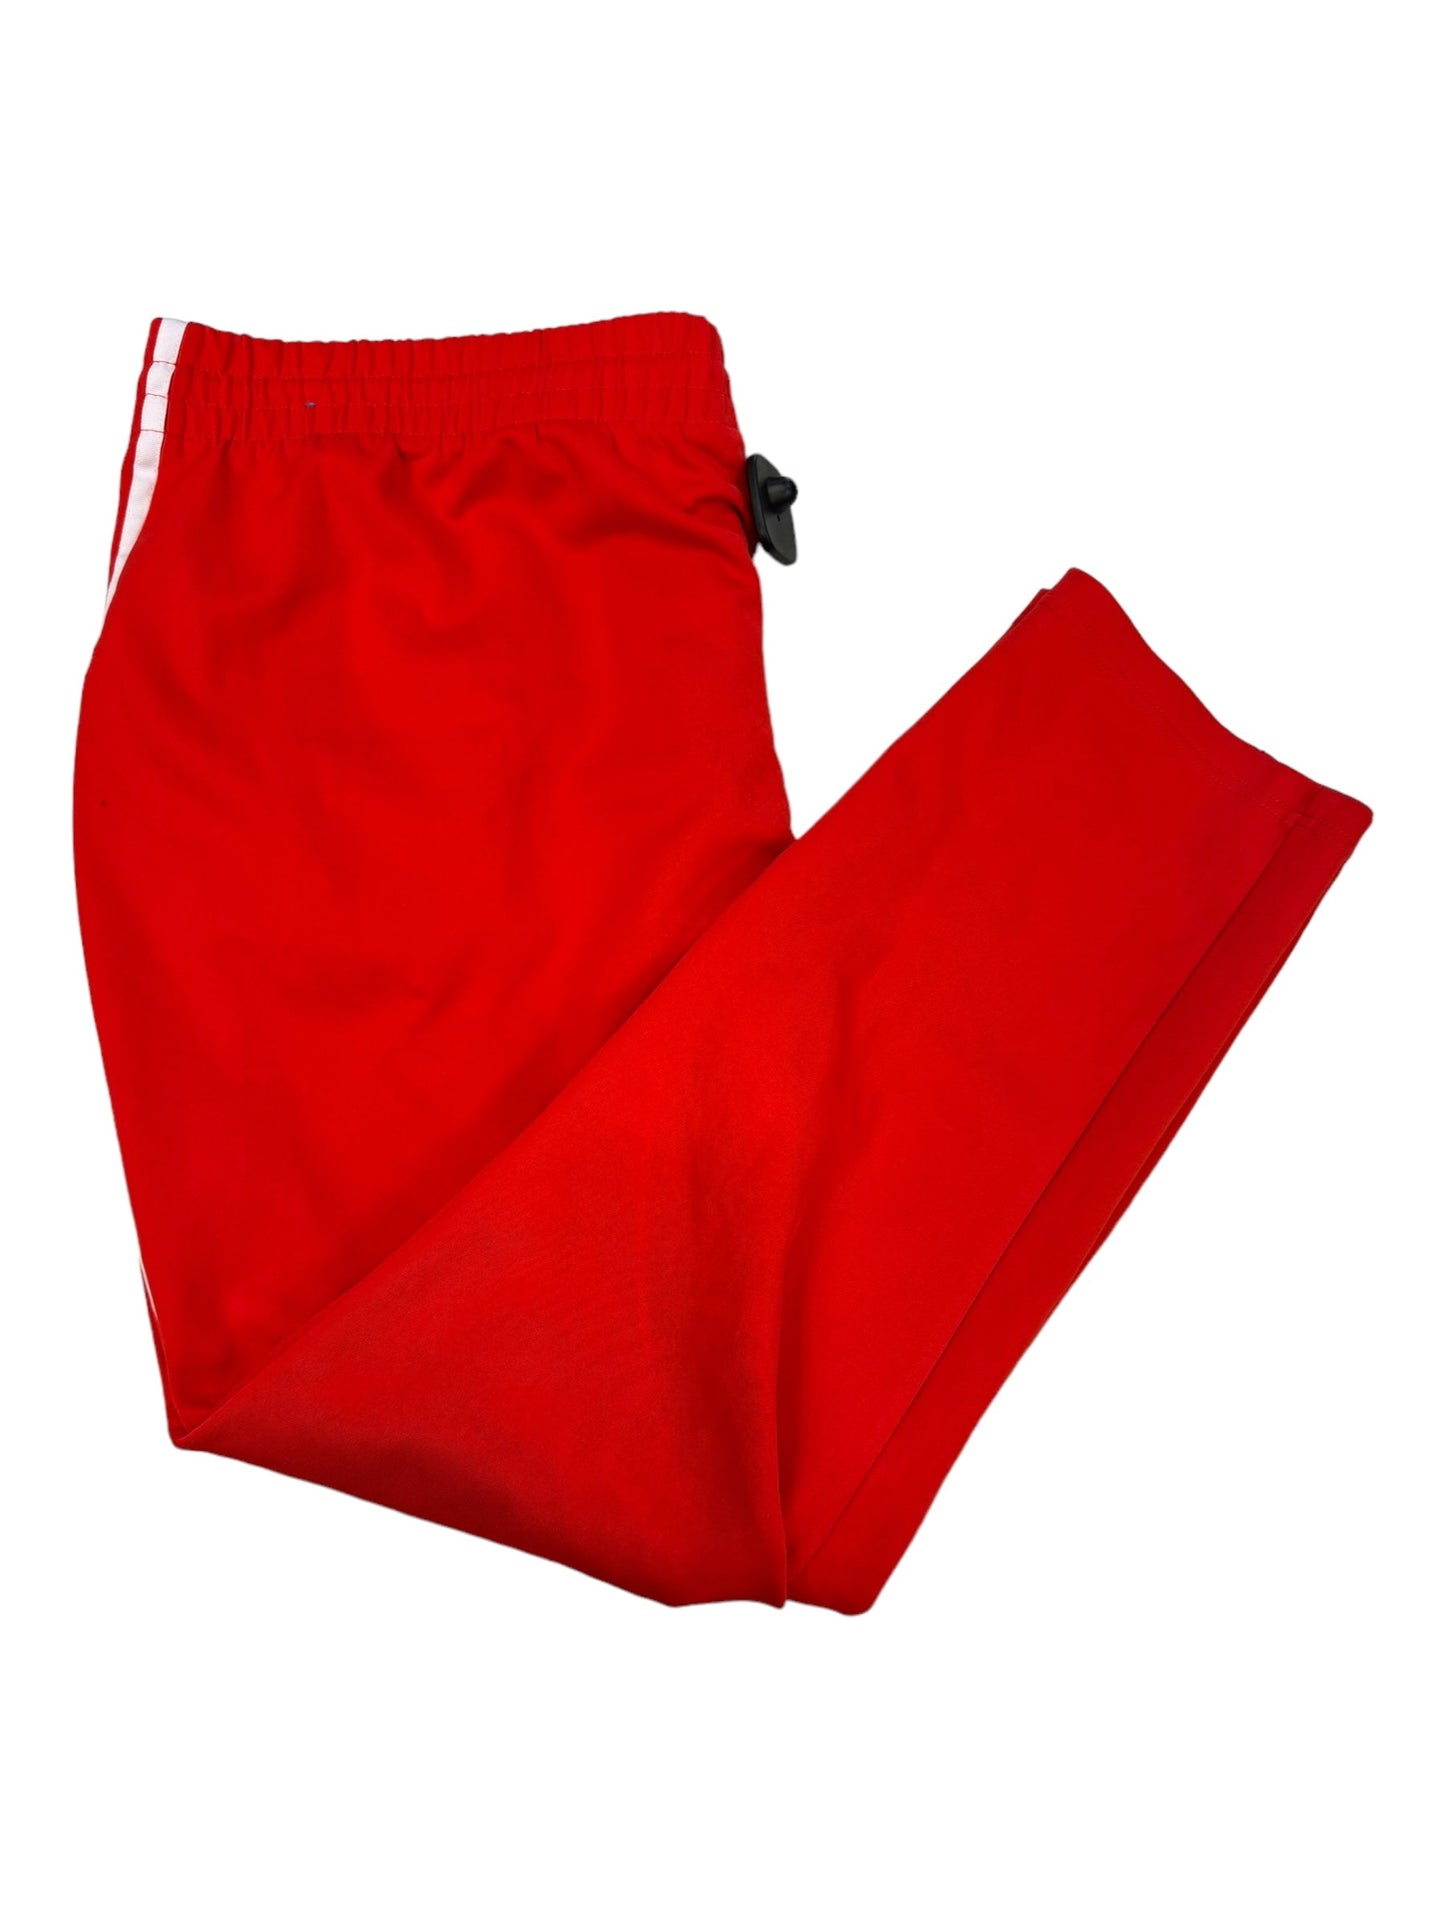 Red Athletic Pants Adidas, Size 4x